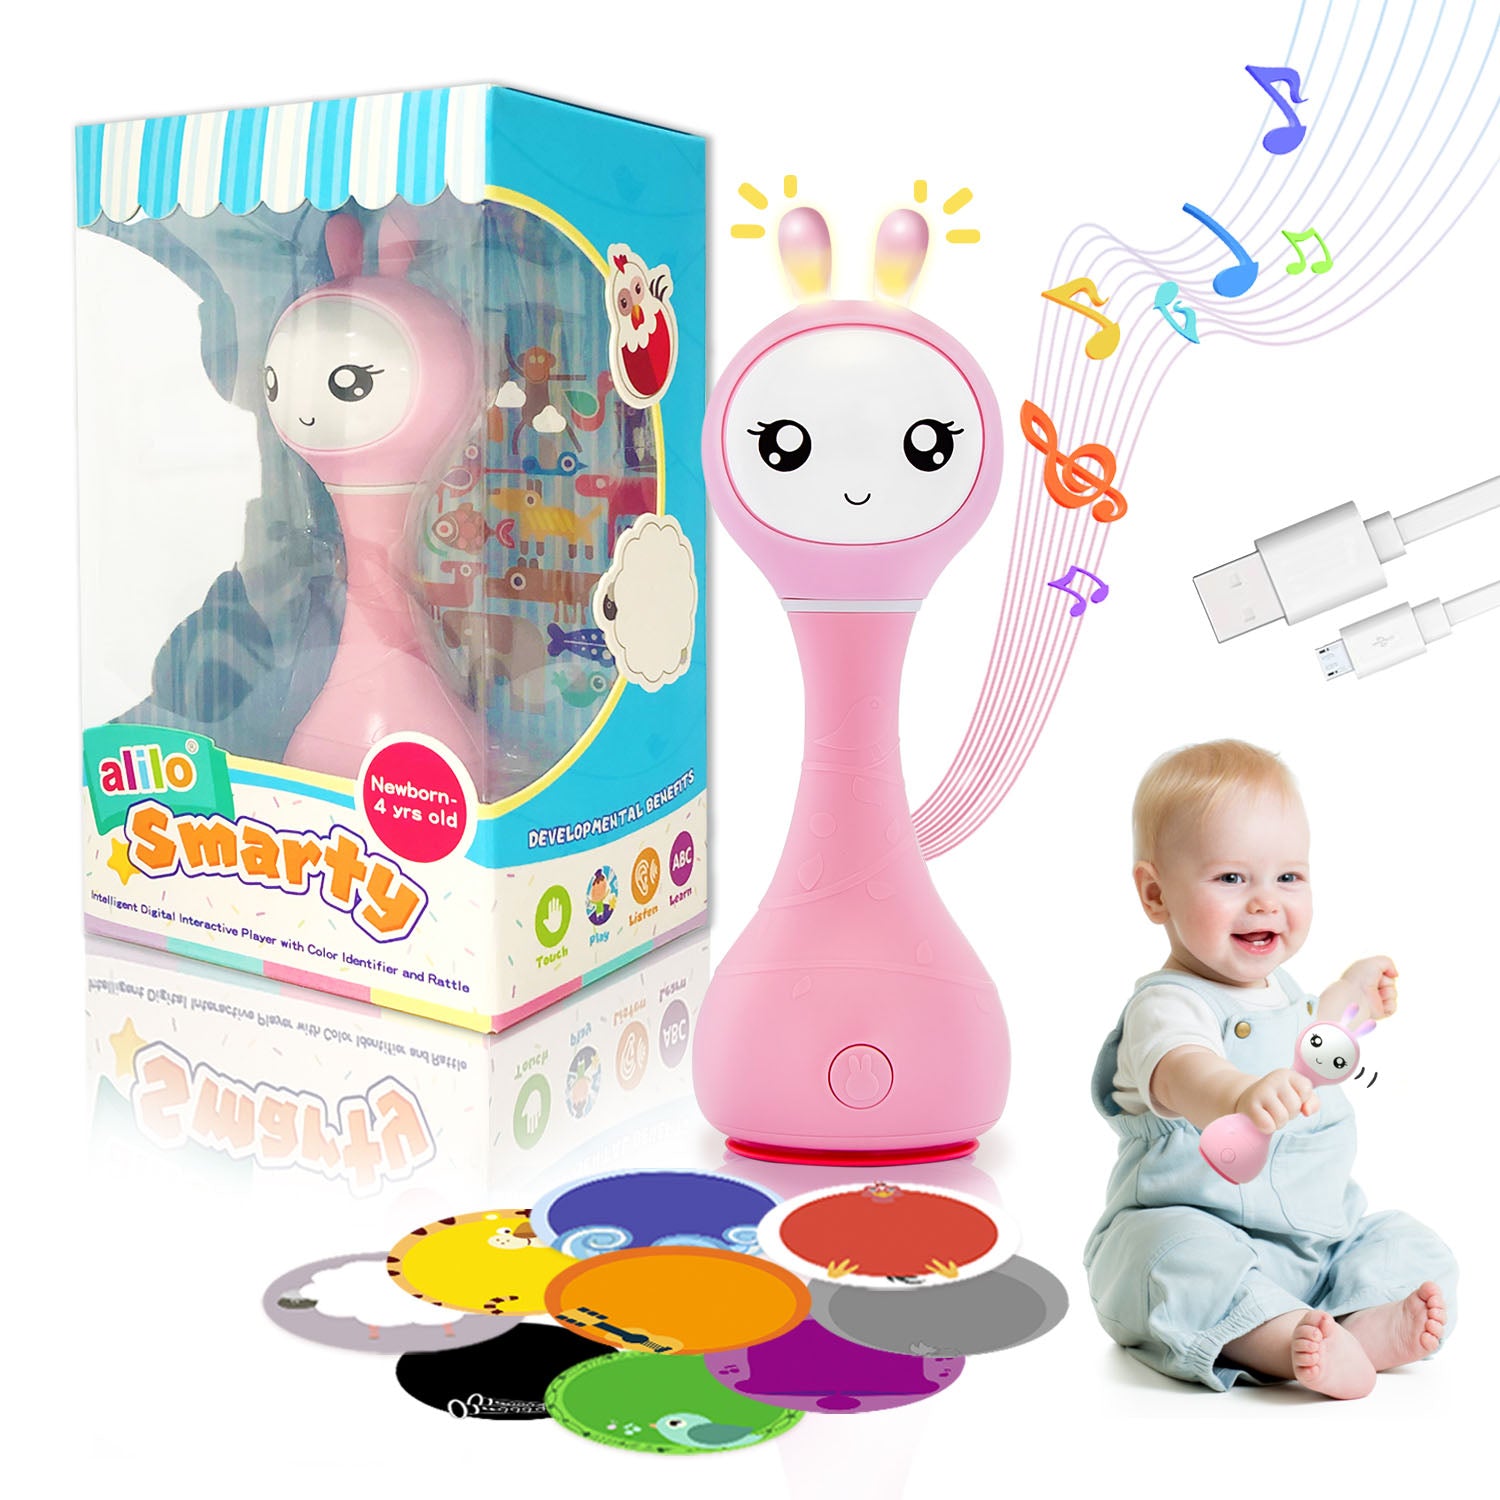 Alilo R1 Smarty - Shake & Tell Rattle w/ Music, Stories and Lullabies